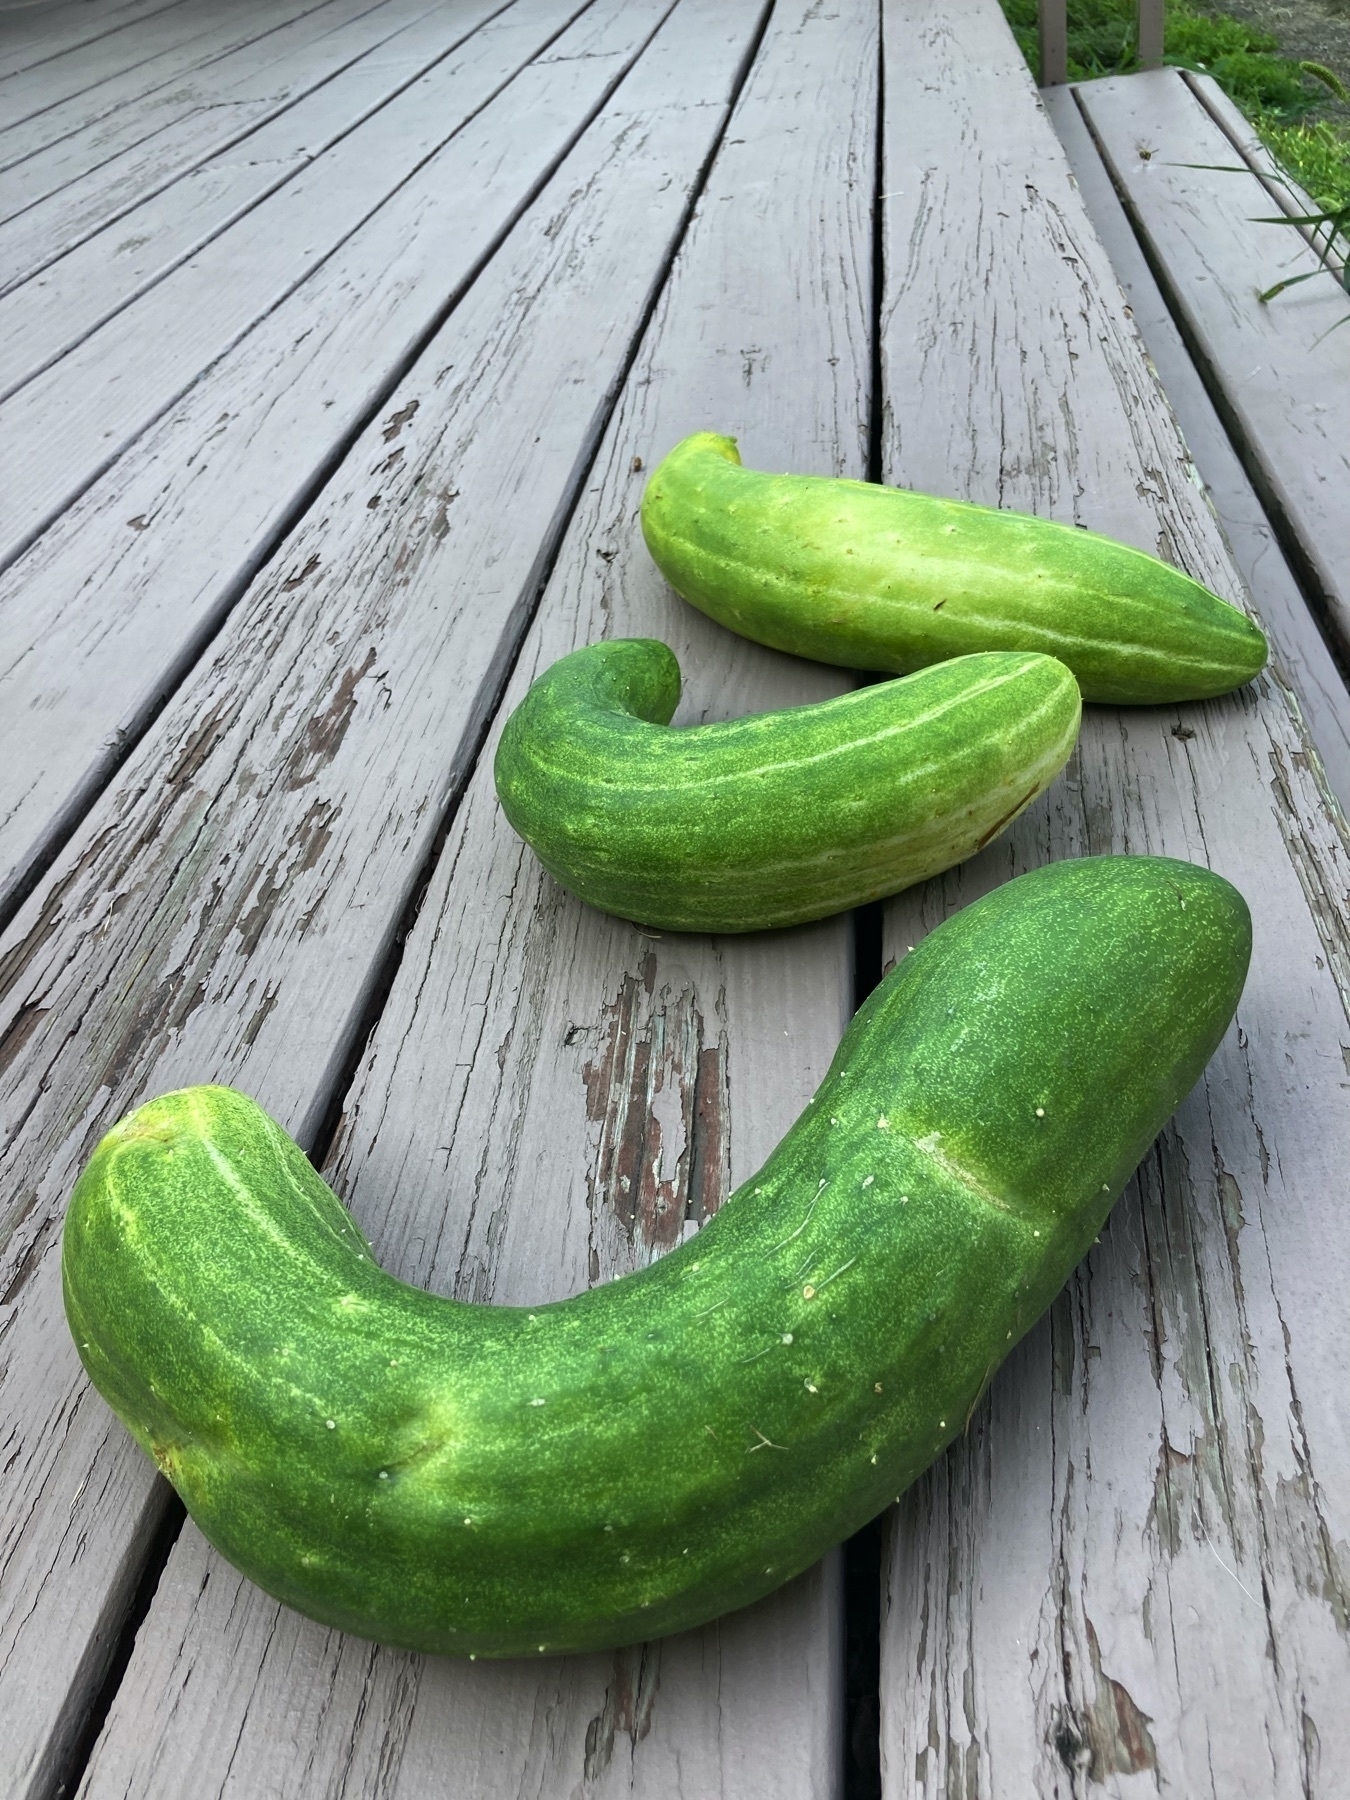 Bent, overgrown cucumbers laid on a wood deck